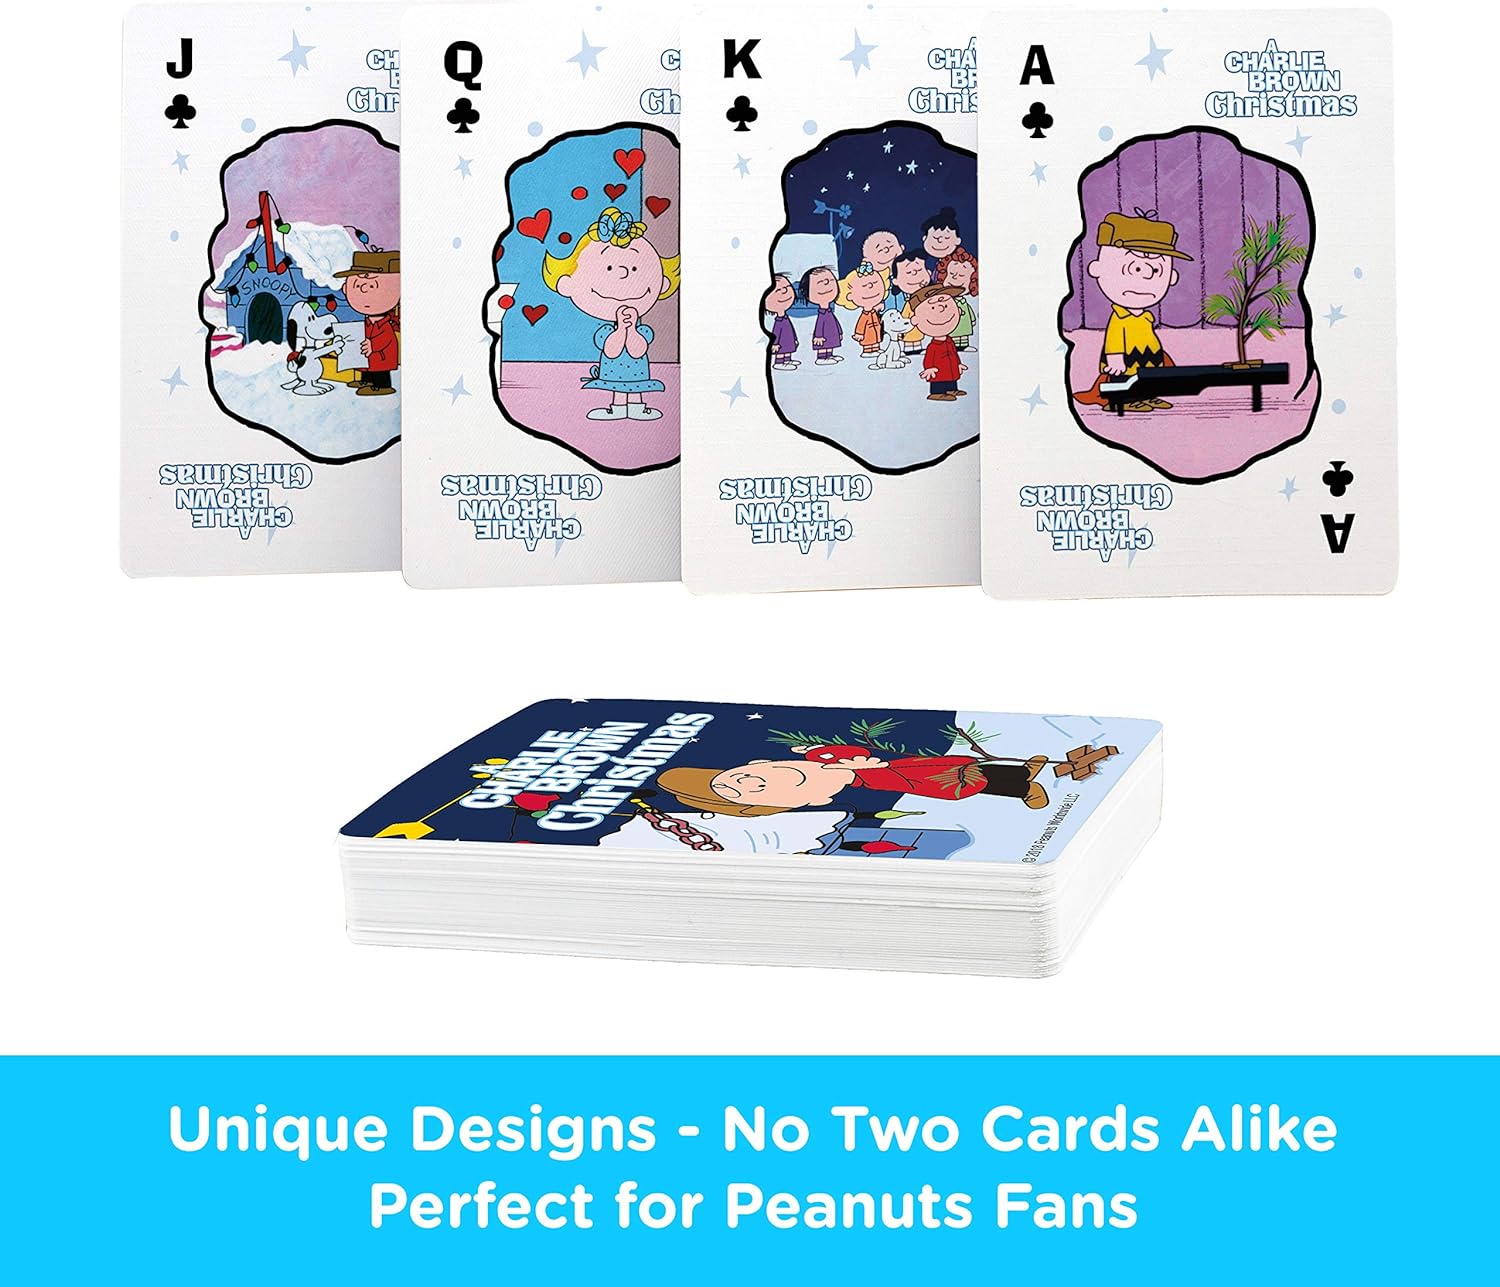 AQUARIUS Peanuts Charlie Brown Christmas Playing Cards - Christmas Themed Deck of Cards for Your Favorite Card Games - Officially Licensed Peanuts Merchandise  Collectibles - Poker Size